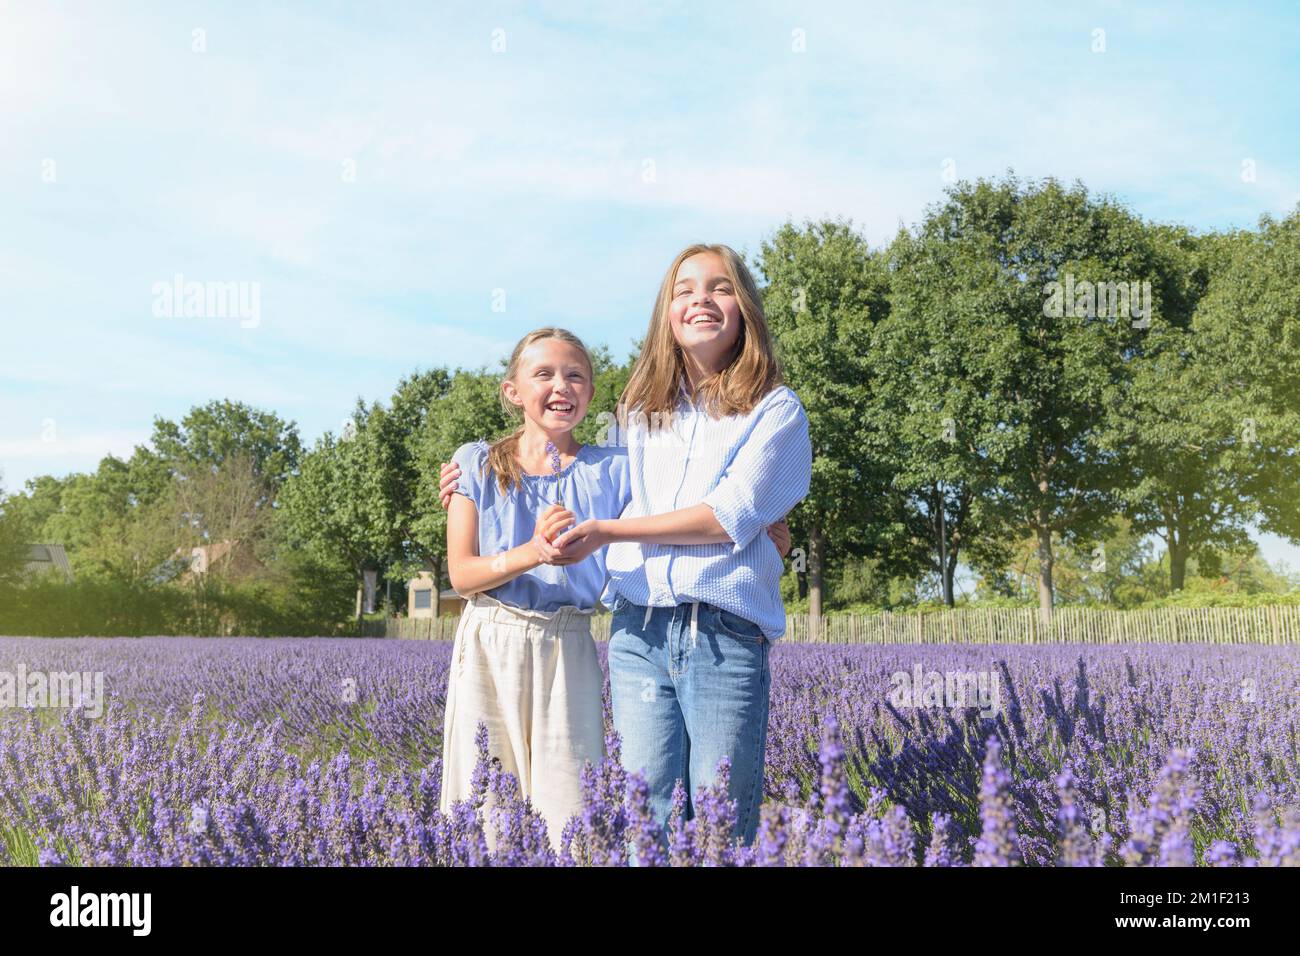 Two teenage girls, friends in the middle of a blooming lavender field. The joy of childhood. lifestyle Stock Photo